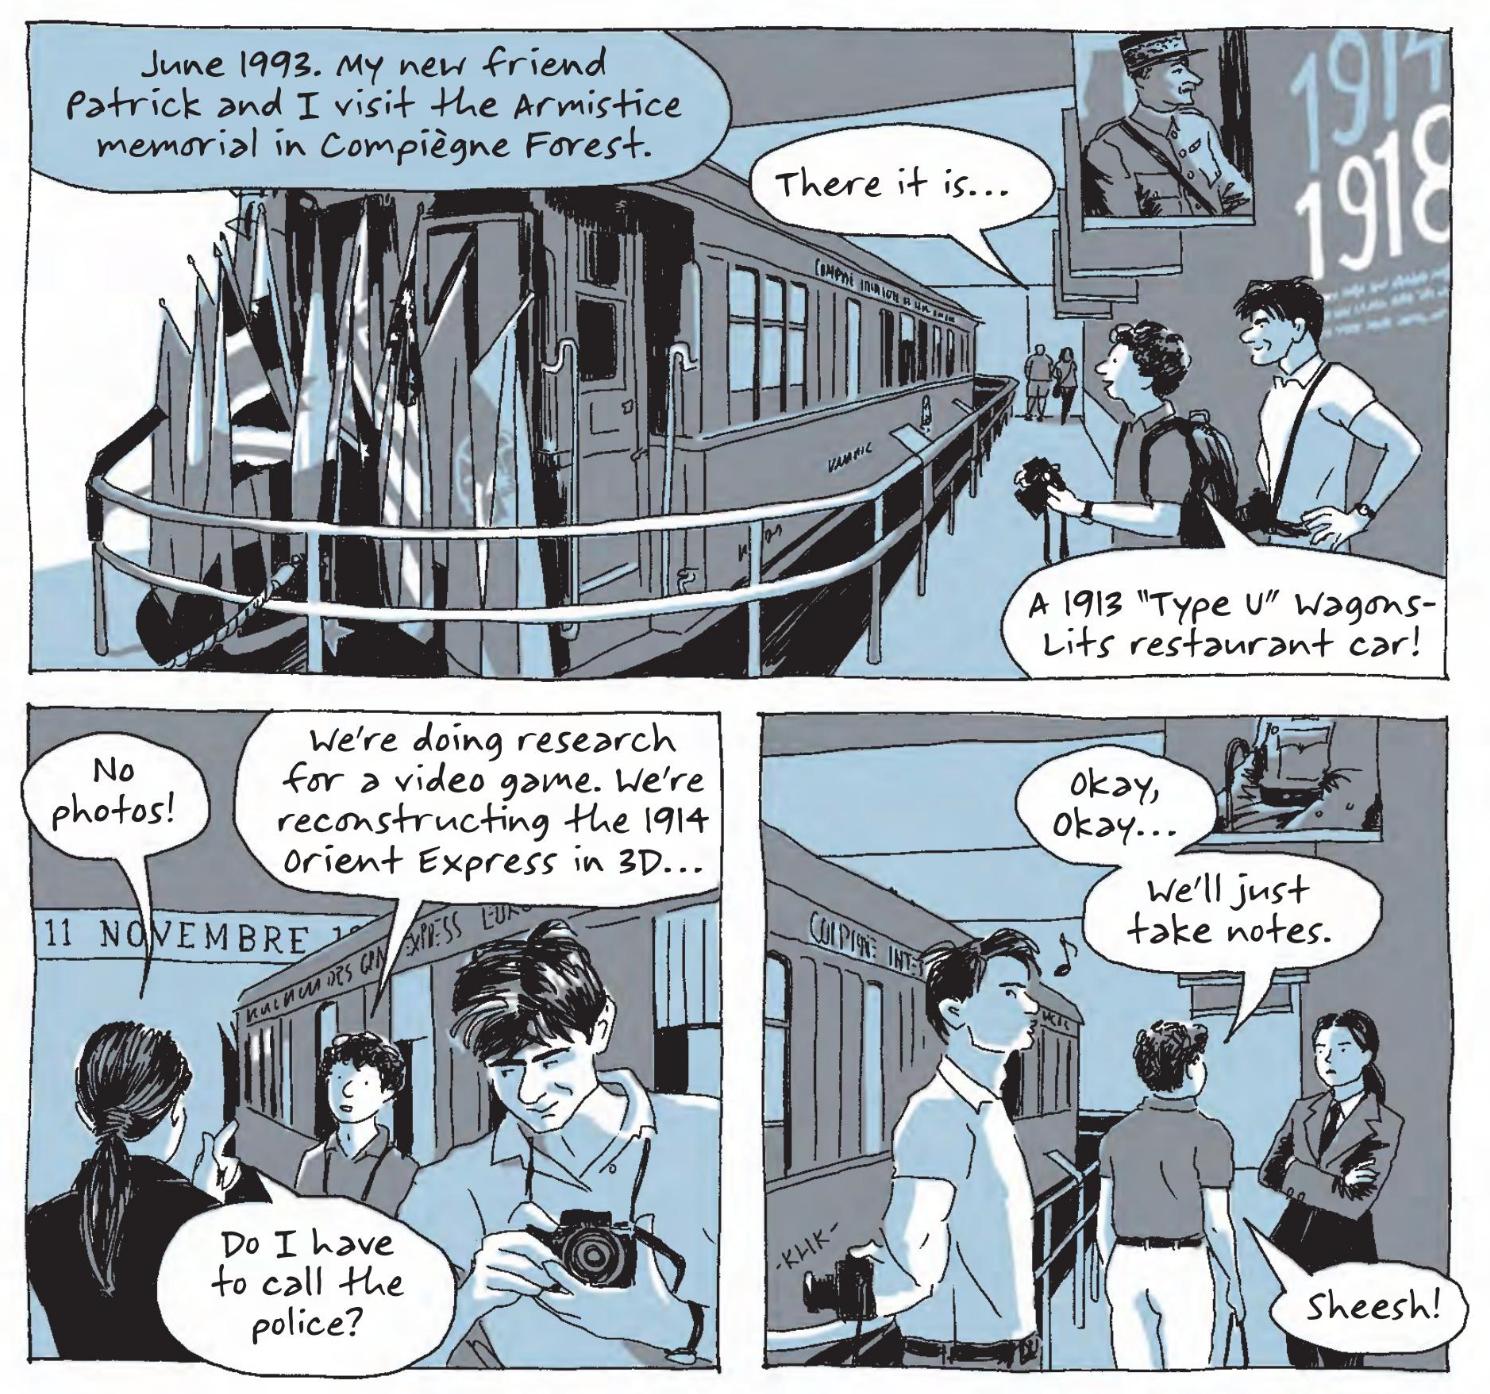 A series of comics panels showing two young game designers taking reference photos of an old train car.